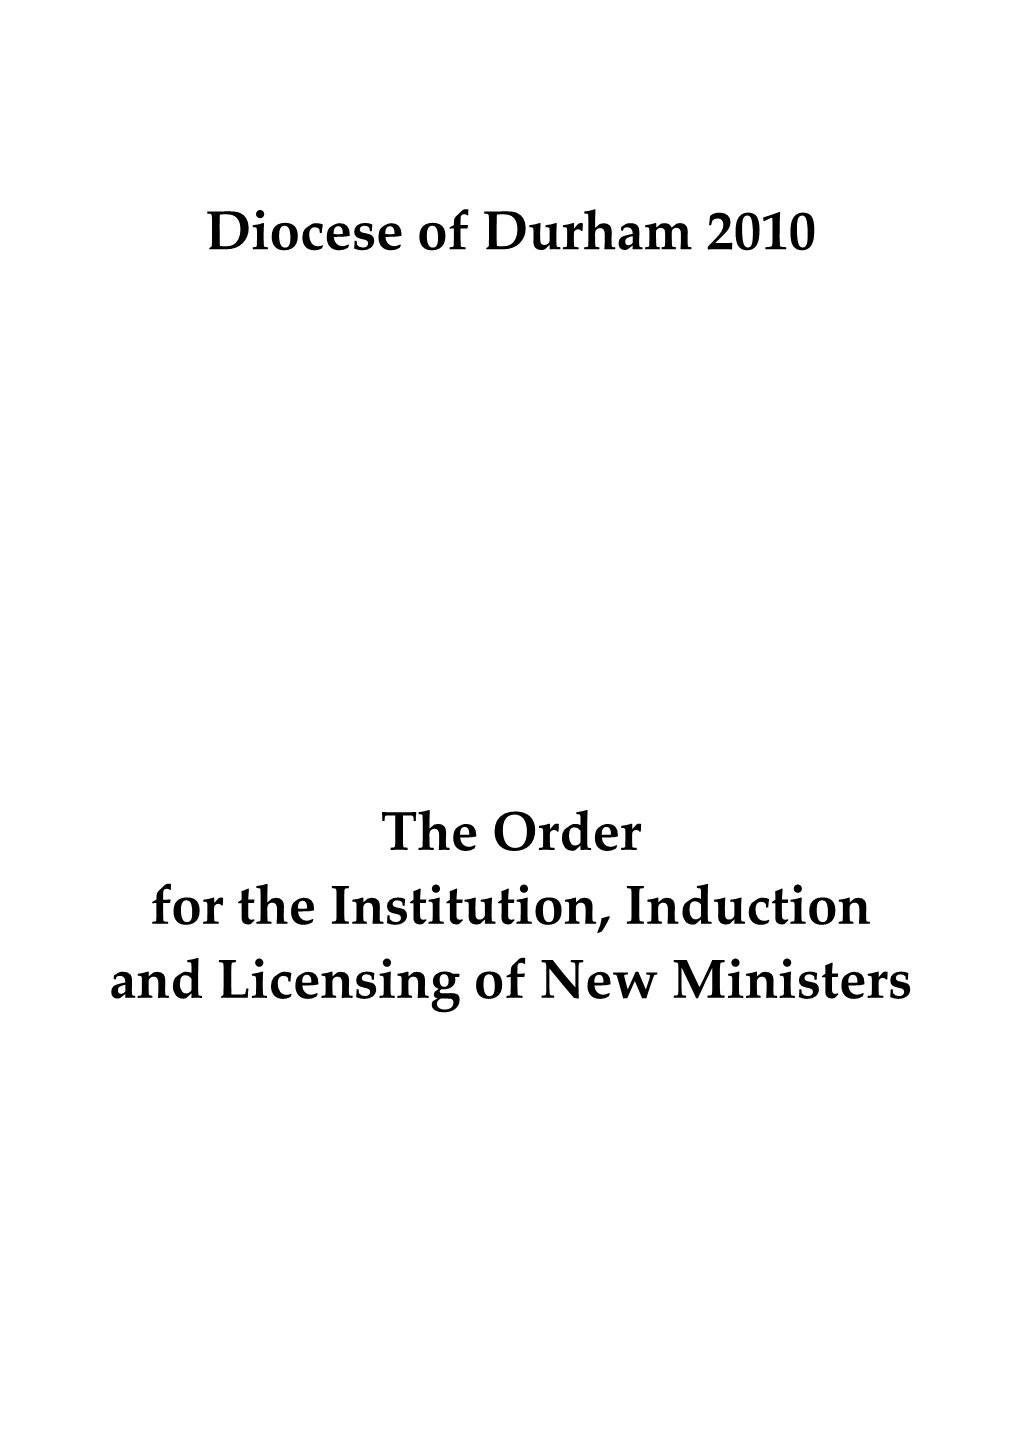 Diocese of Durham 2001